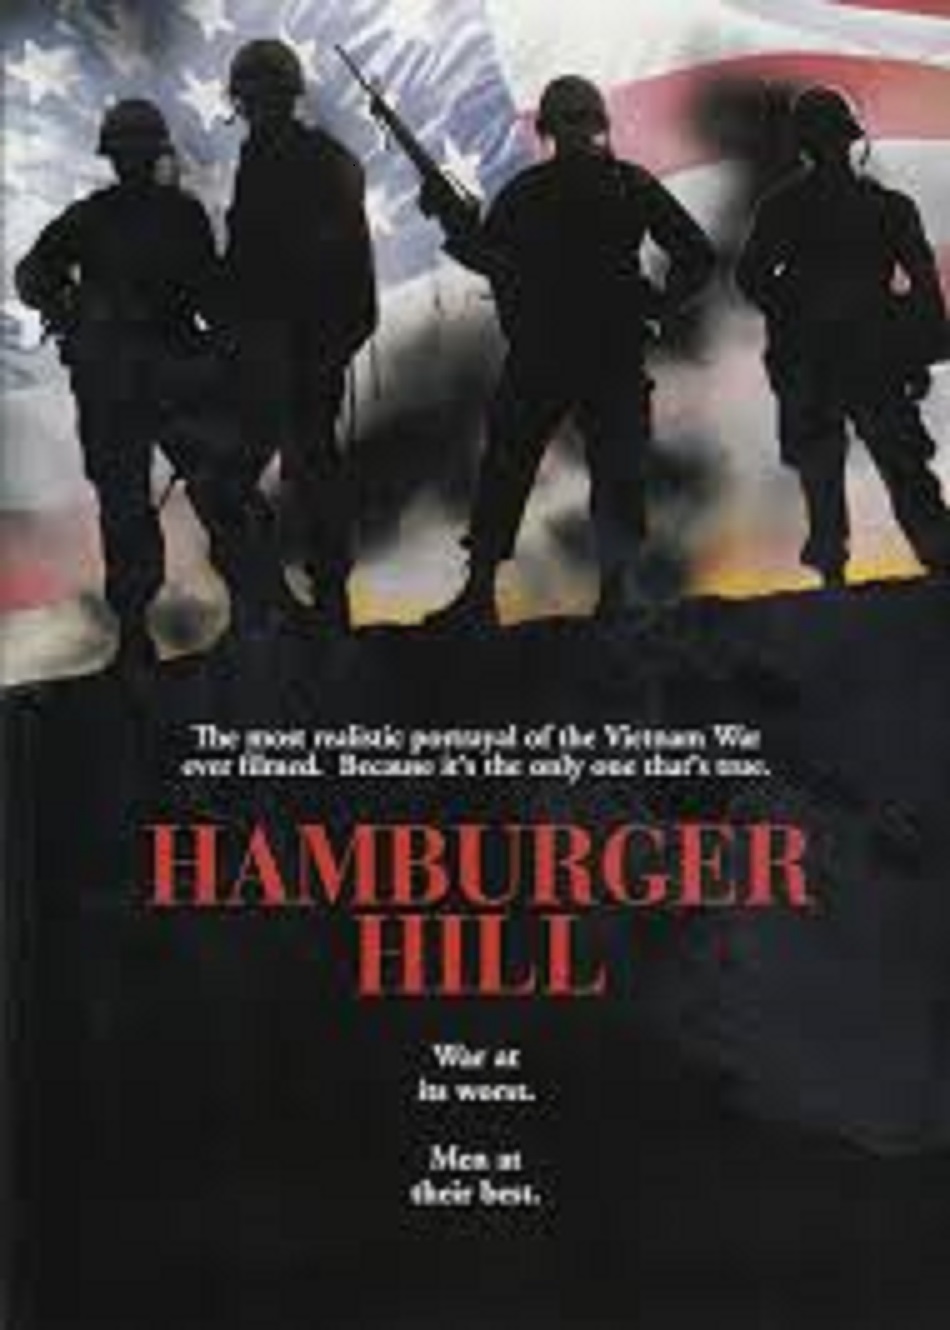 HAMBURGER HILL- I WAS THERE ON  MAY 1st 1969